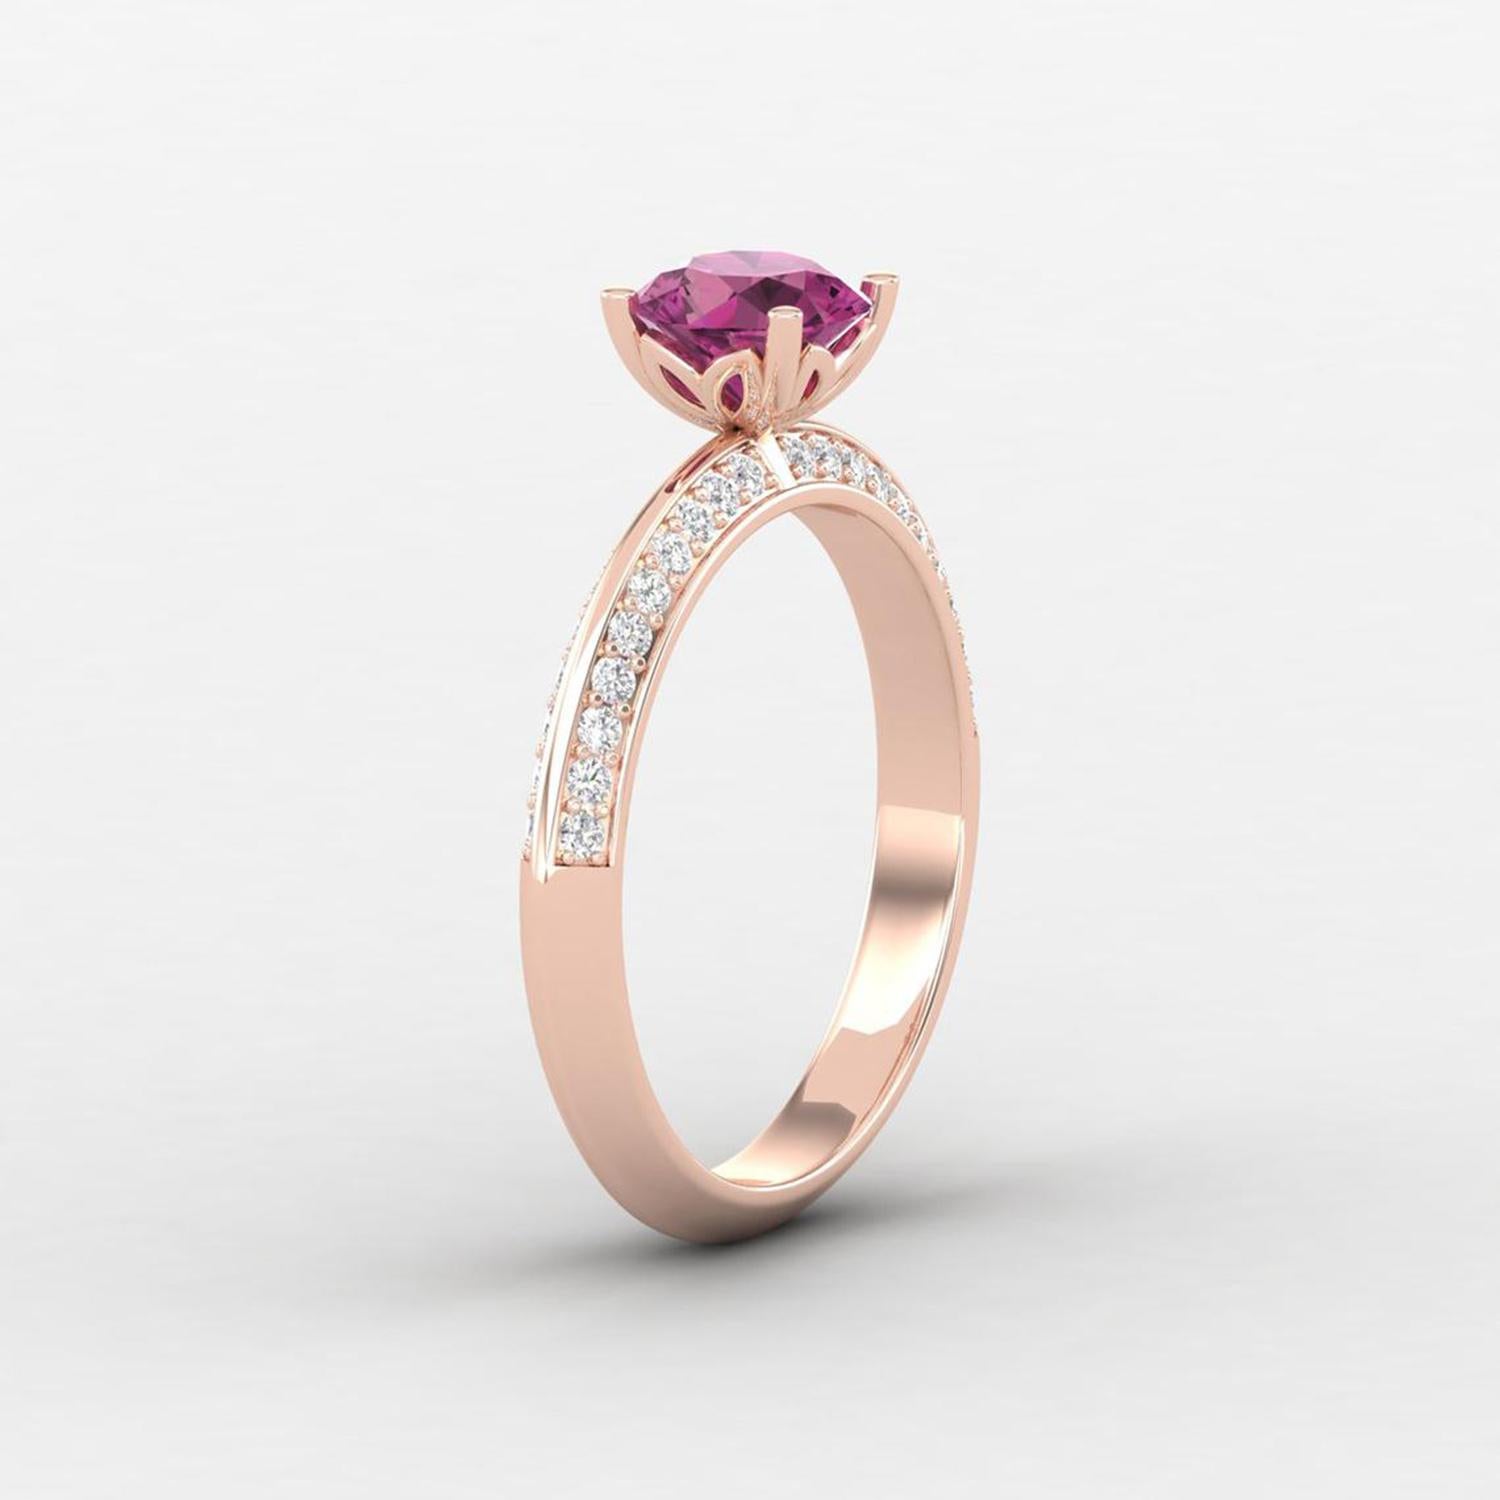 Round Cut 14 K Gold Pink Rubellite Tourmaline Ring / Diamond Solitaire Ring / Ring for Her For Sale